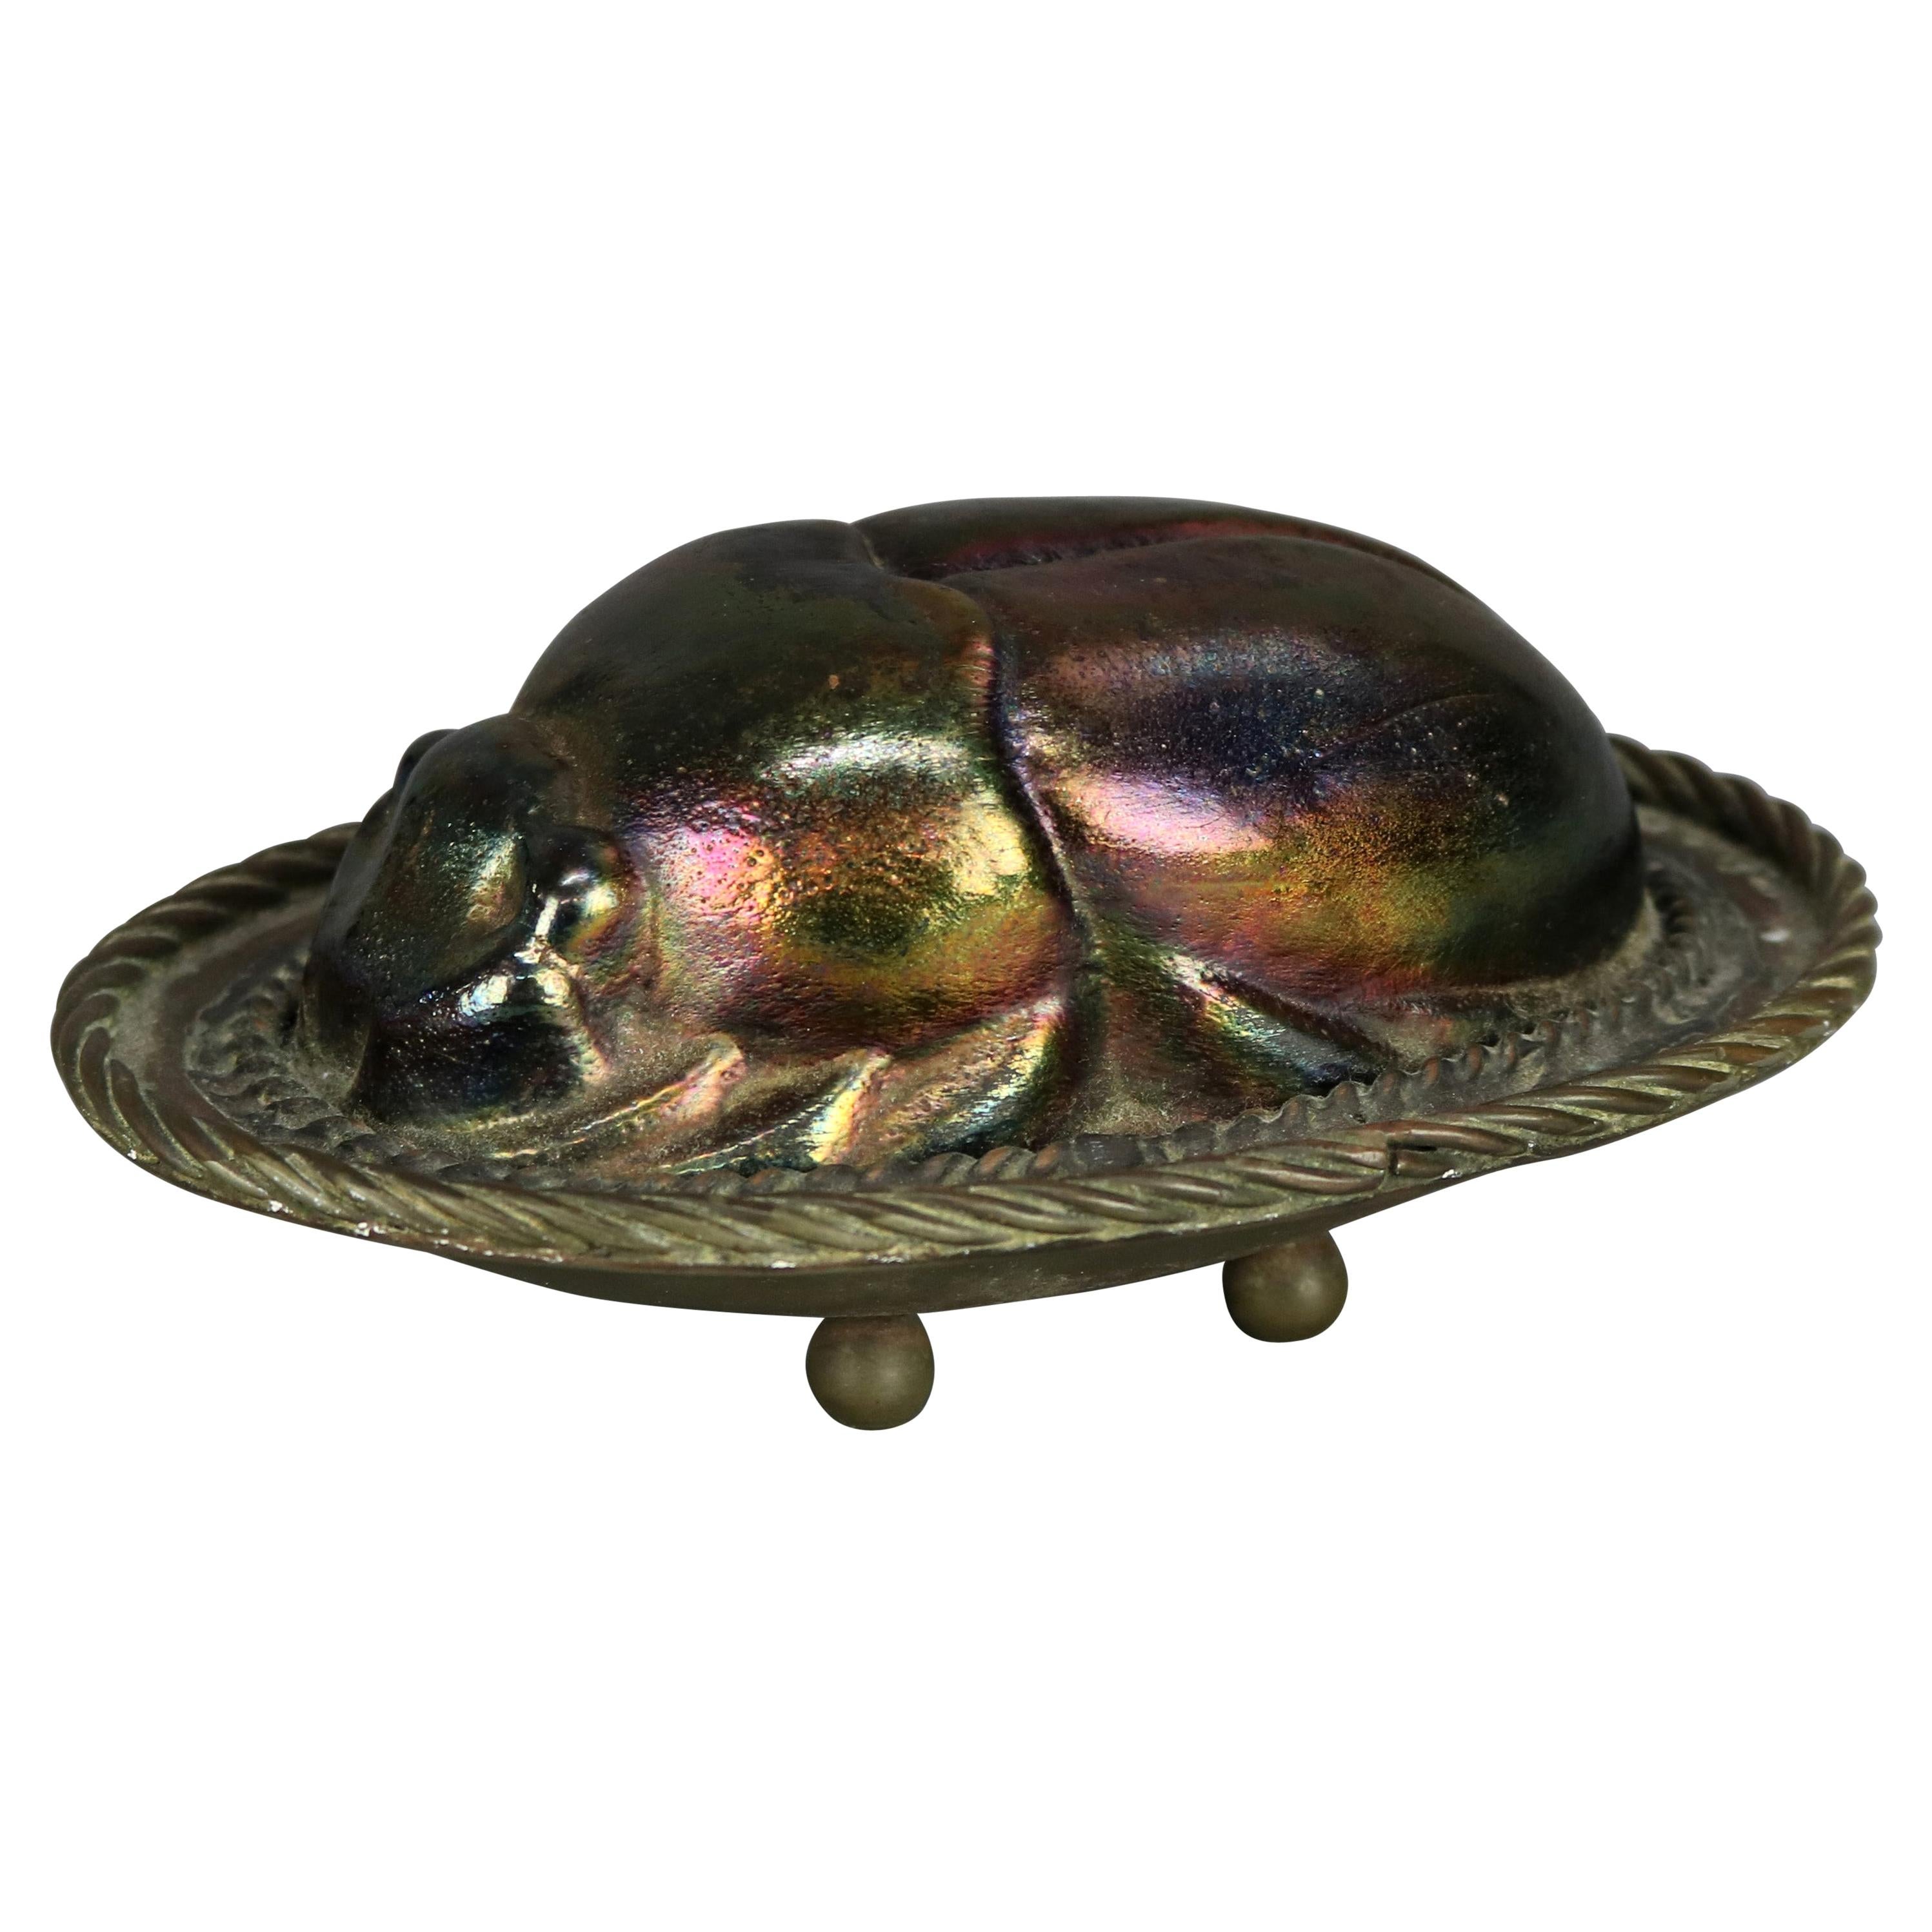 Antique Bronze & Art Glass Scarab Sculpture After Tiffany, 20th C